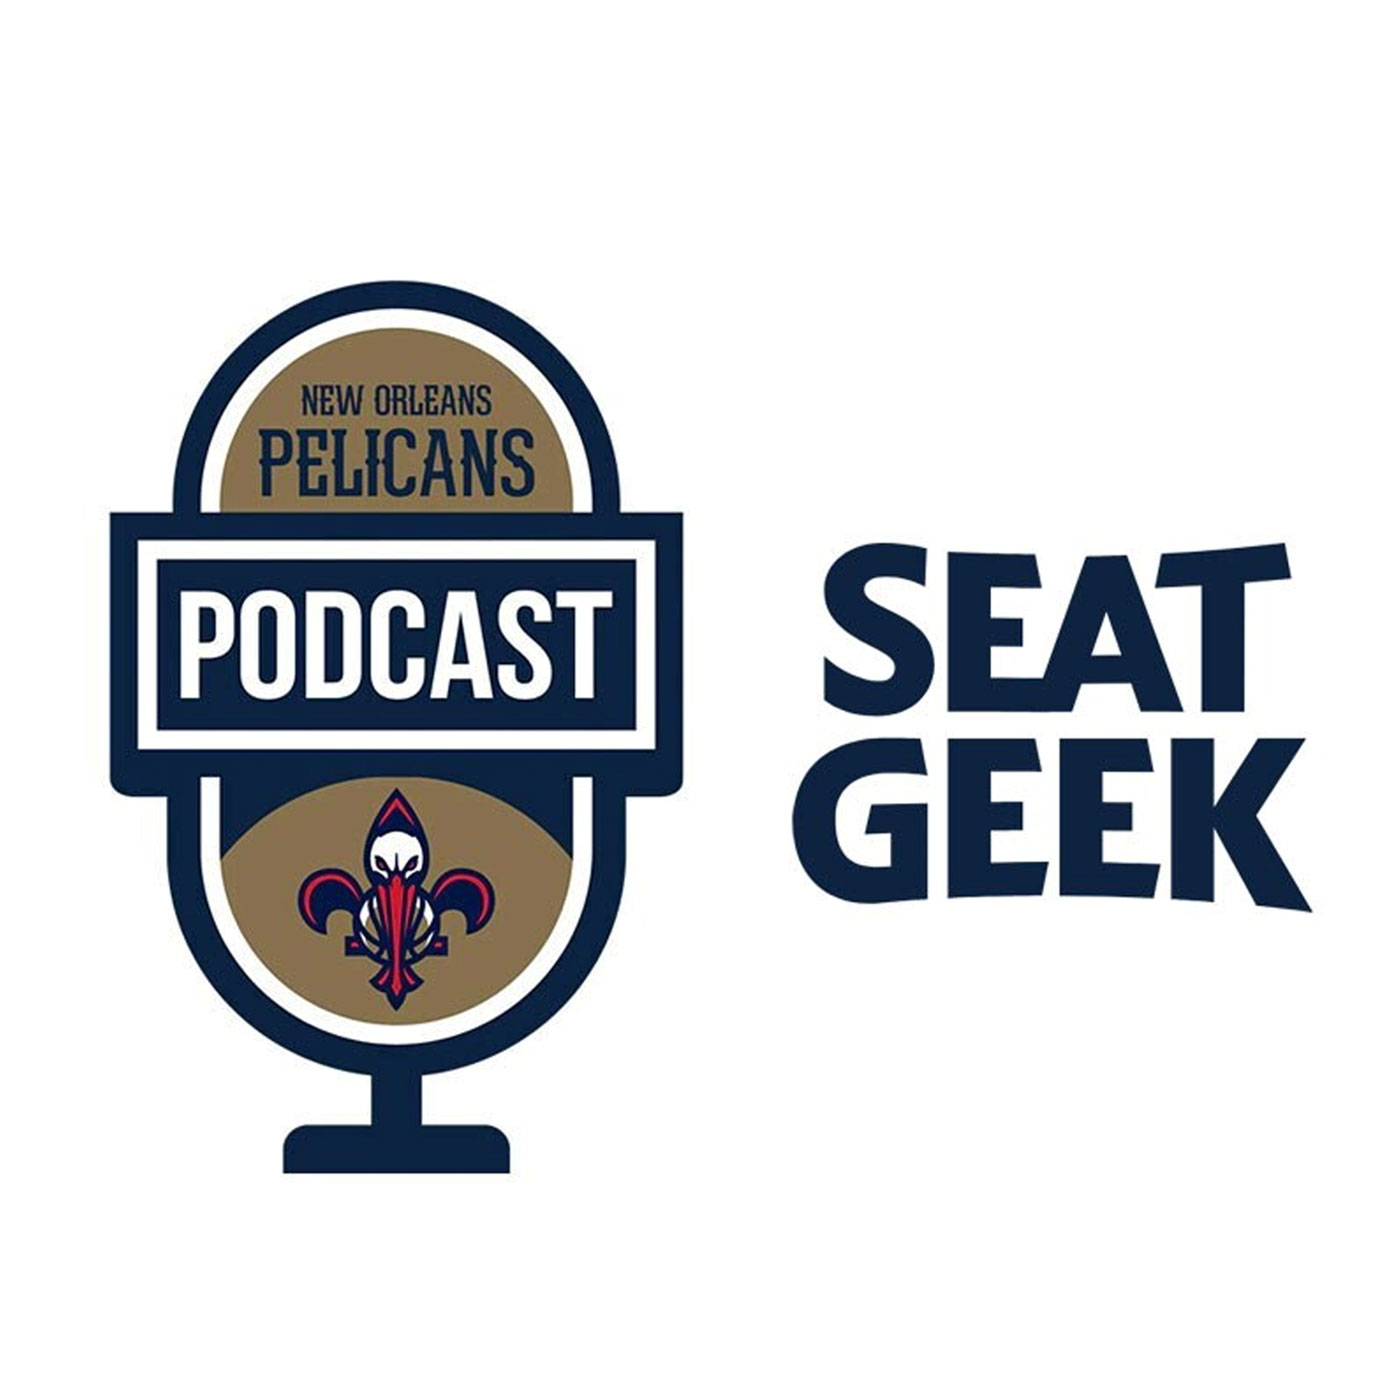 Zion Extension and Summer League Preview on the New Orleans Pelicans Podcast presented by SeatGeek - July 7, 2022